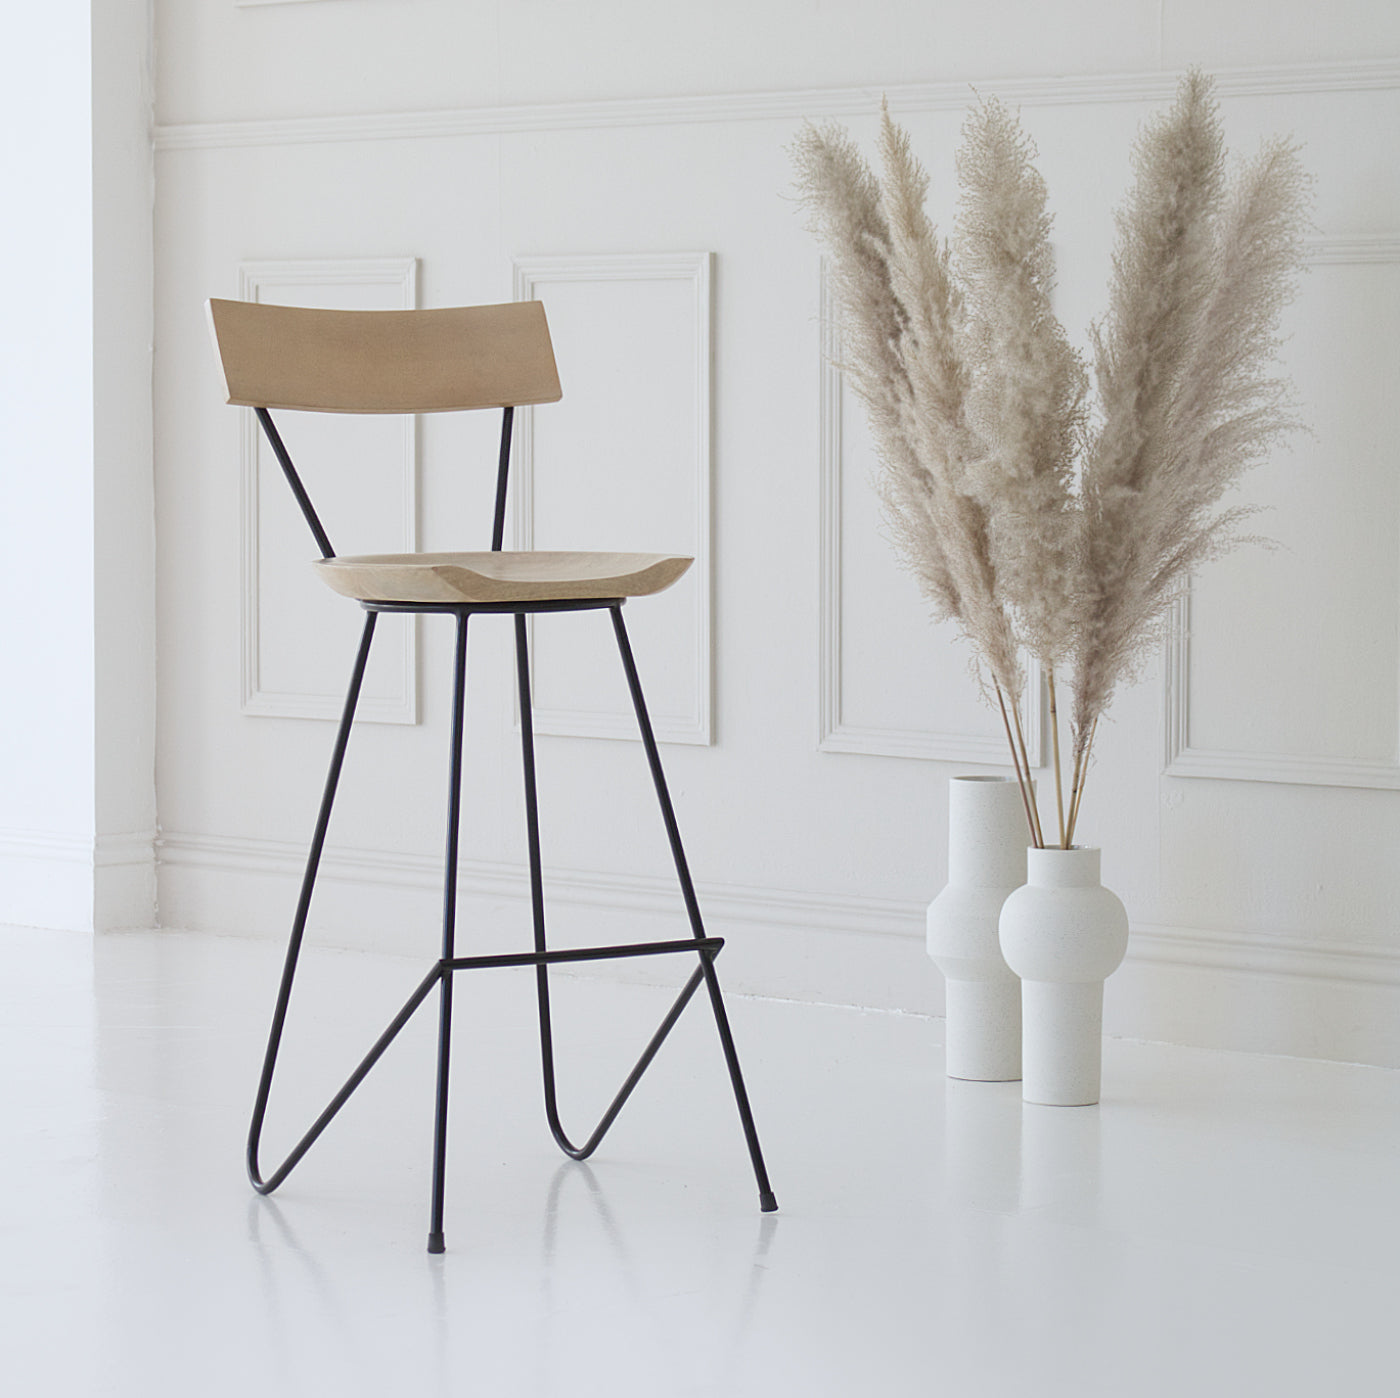 Are Wooden Bar Stools Comfortable?